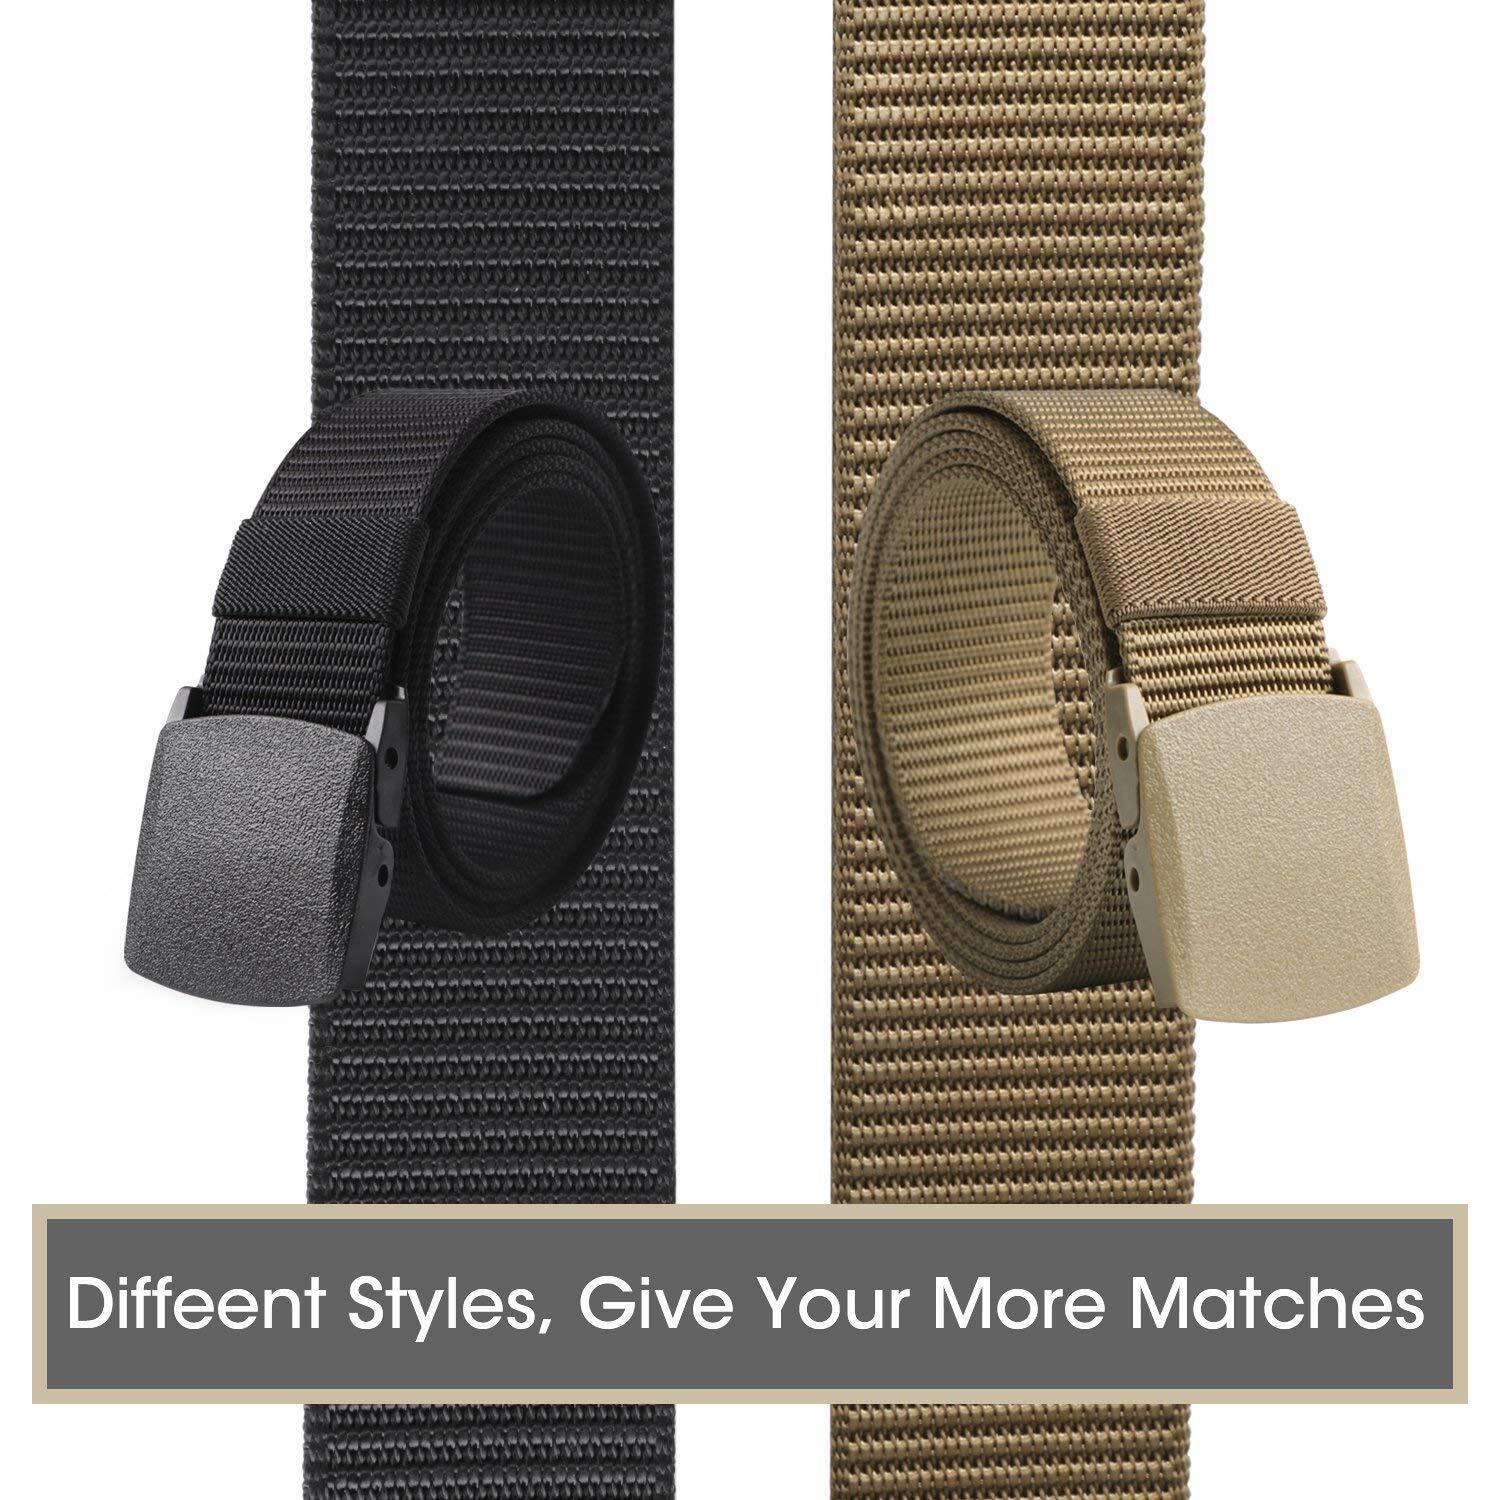 Nylon Military Tactical Battle Belt 2 Pack Outdoor Web Belt With Plastic Buckle - Beltbuy Store